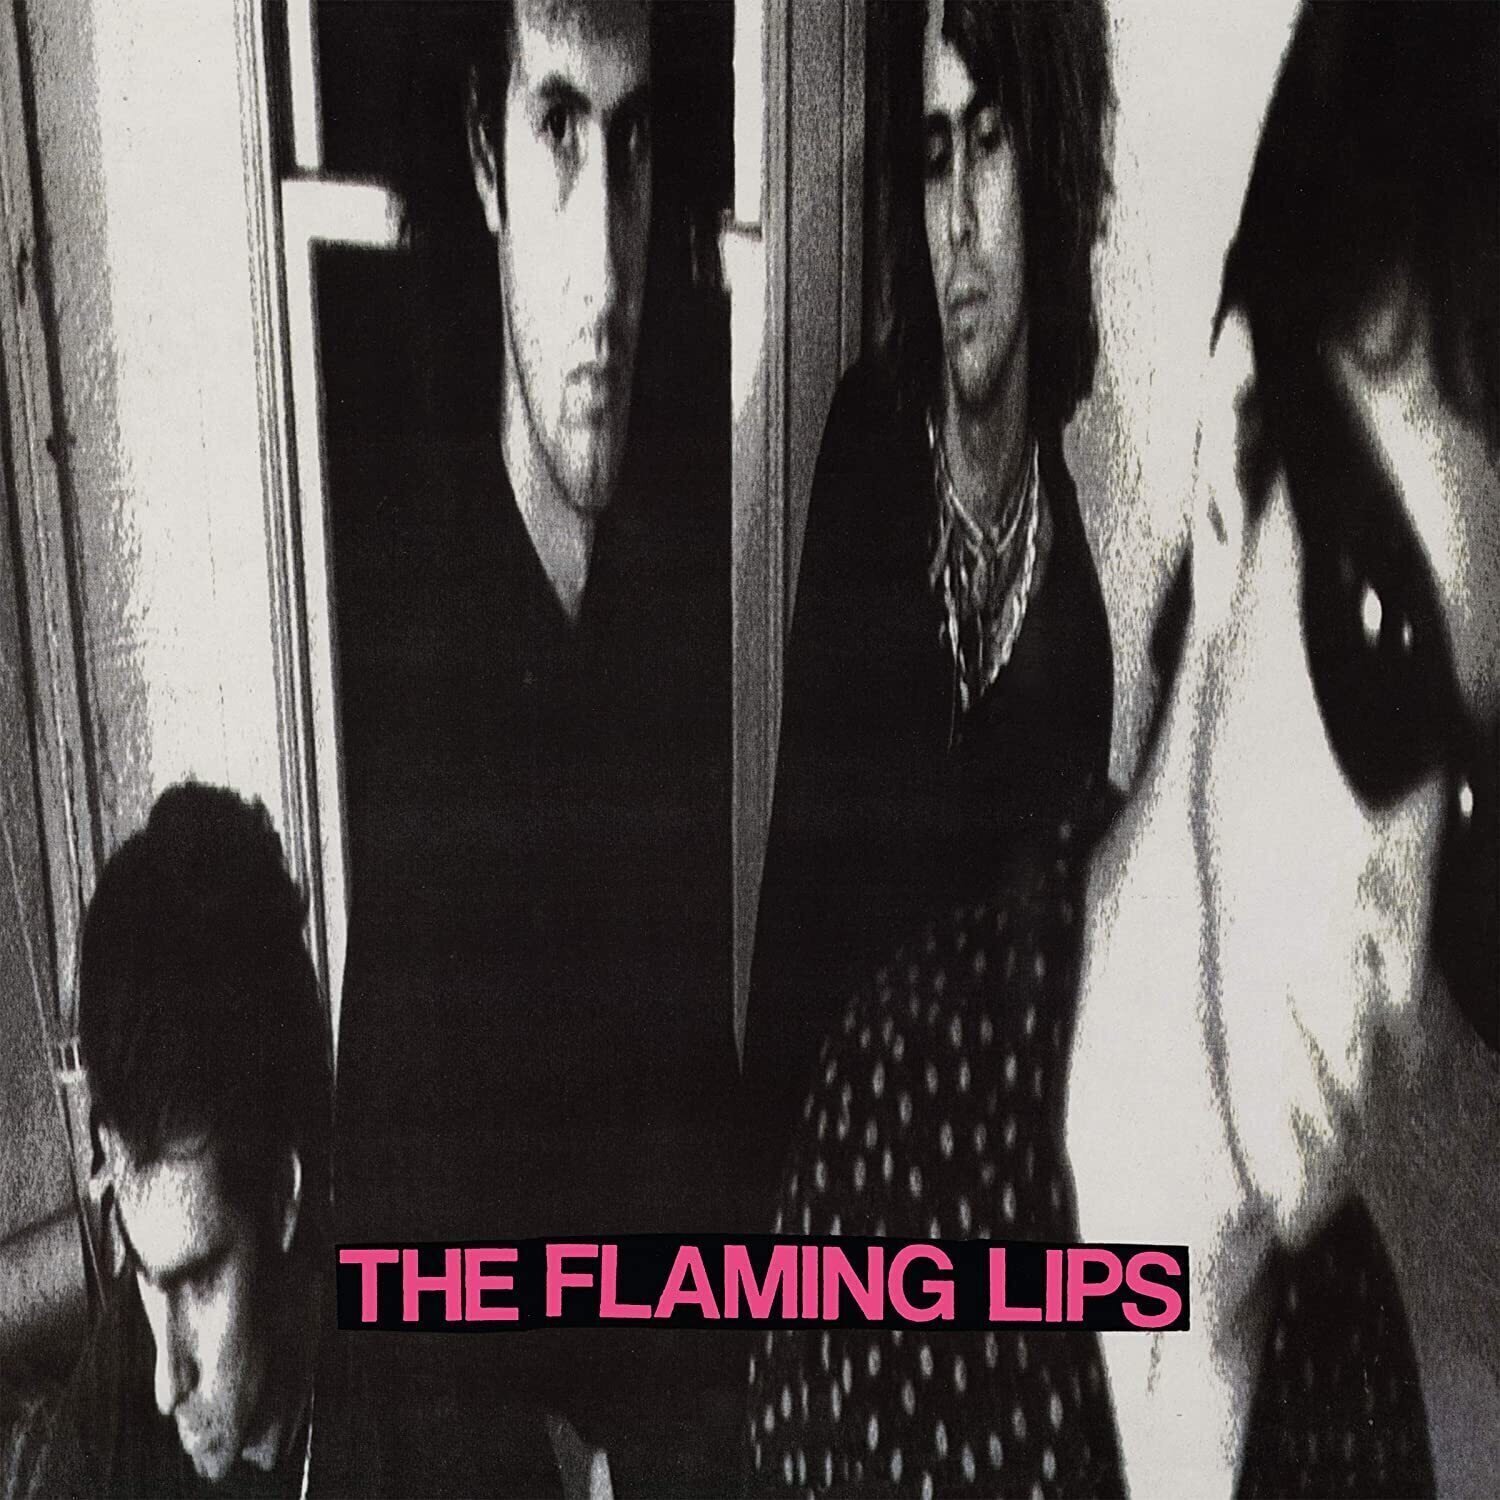 Vinyl Record The Flaming Lips - In A Priest Driven Ambulance, With Silver Sunshine Stares (LP)